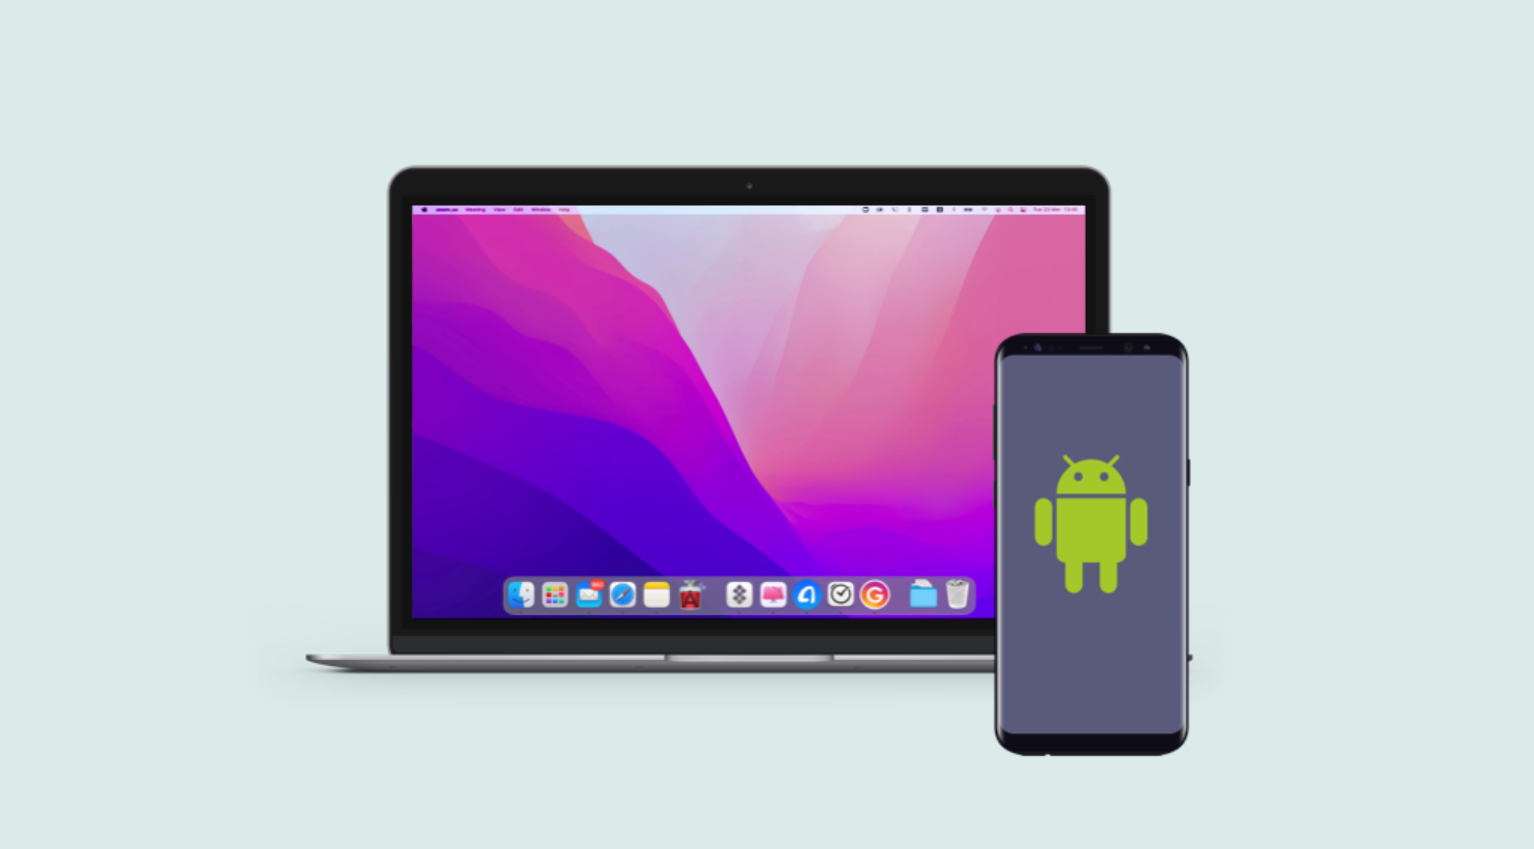 Mac and Android are not natively compatible